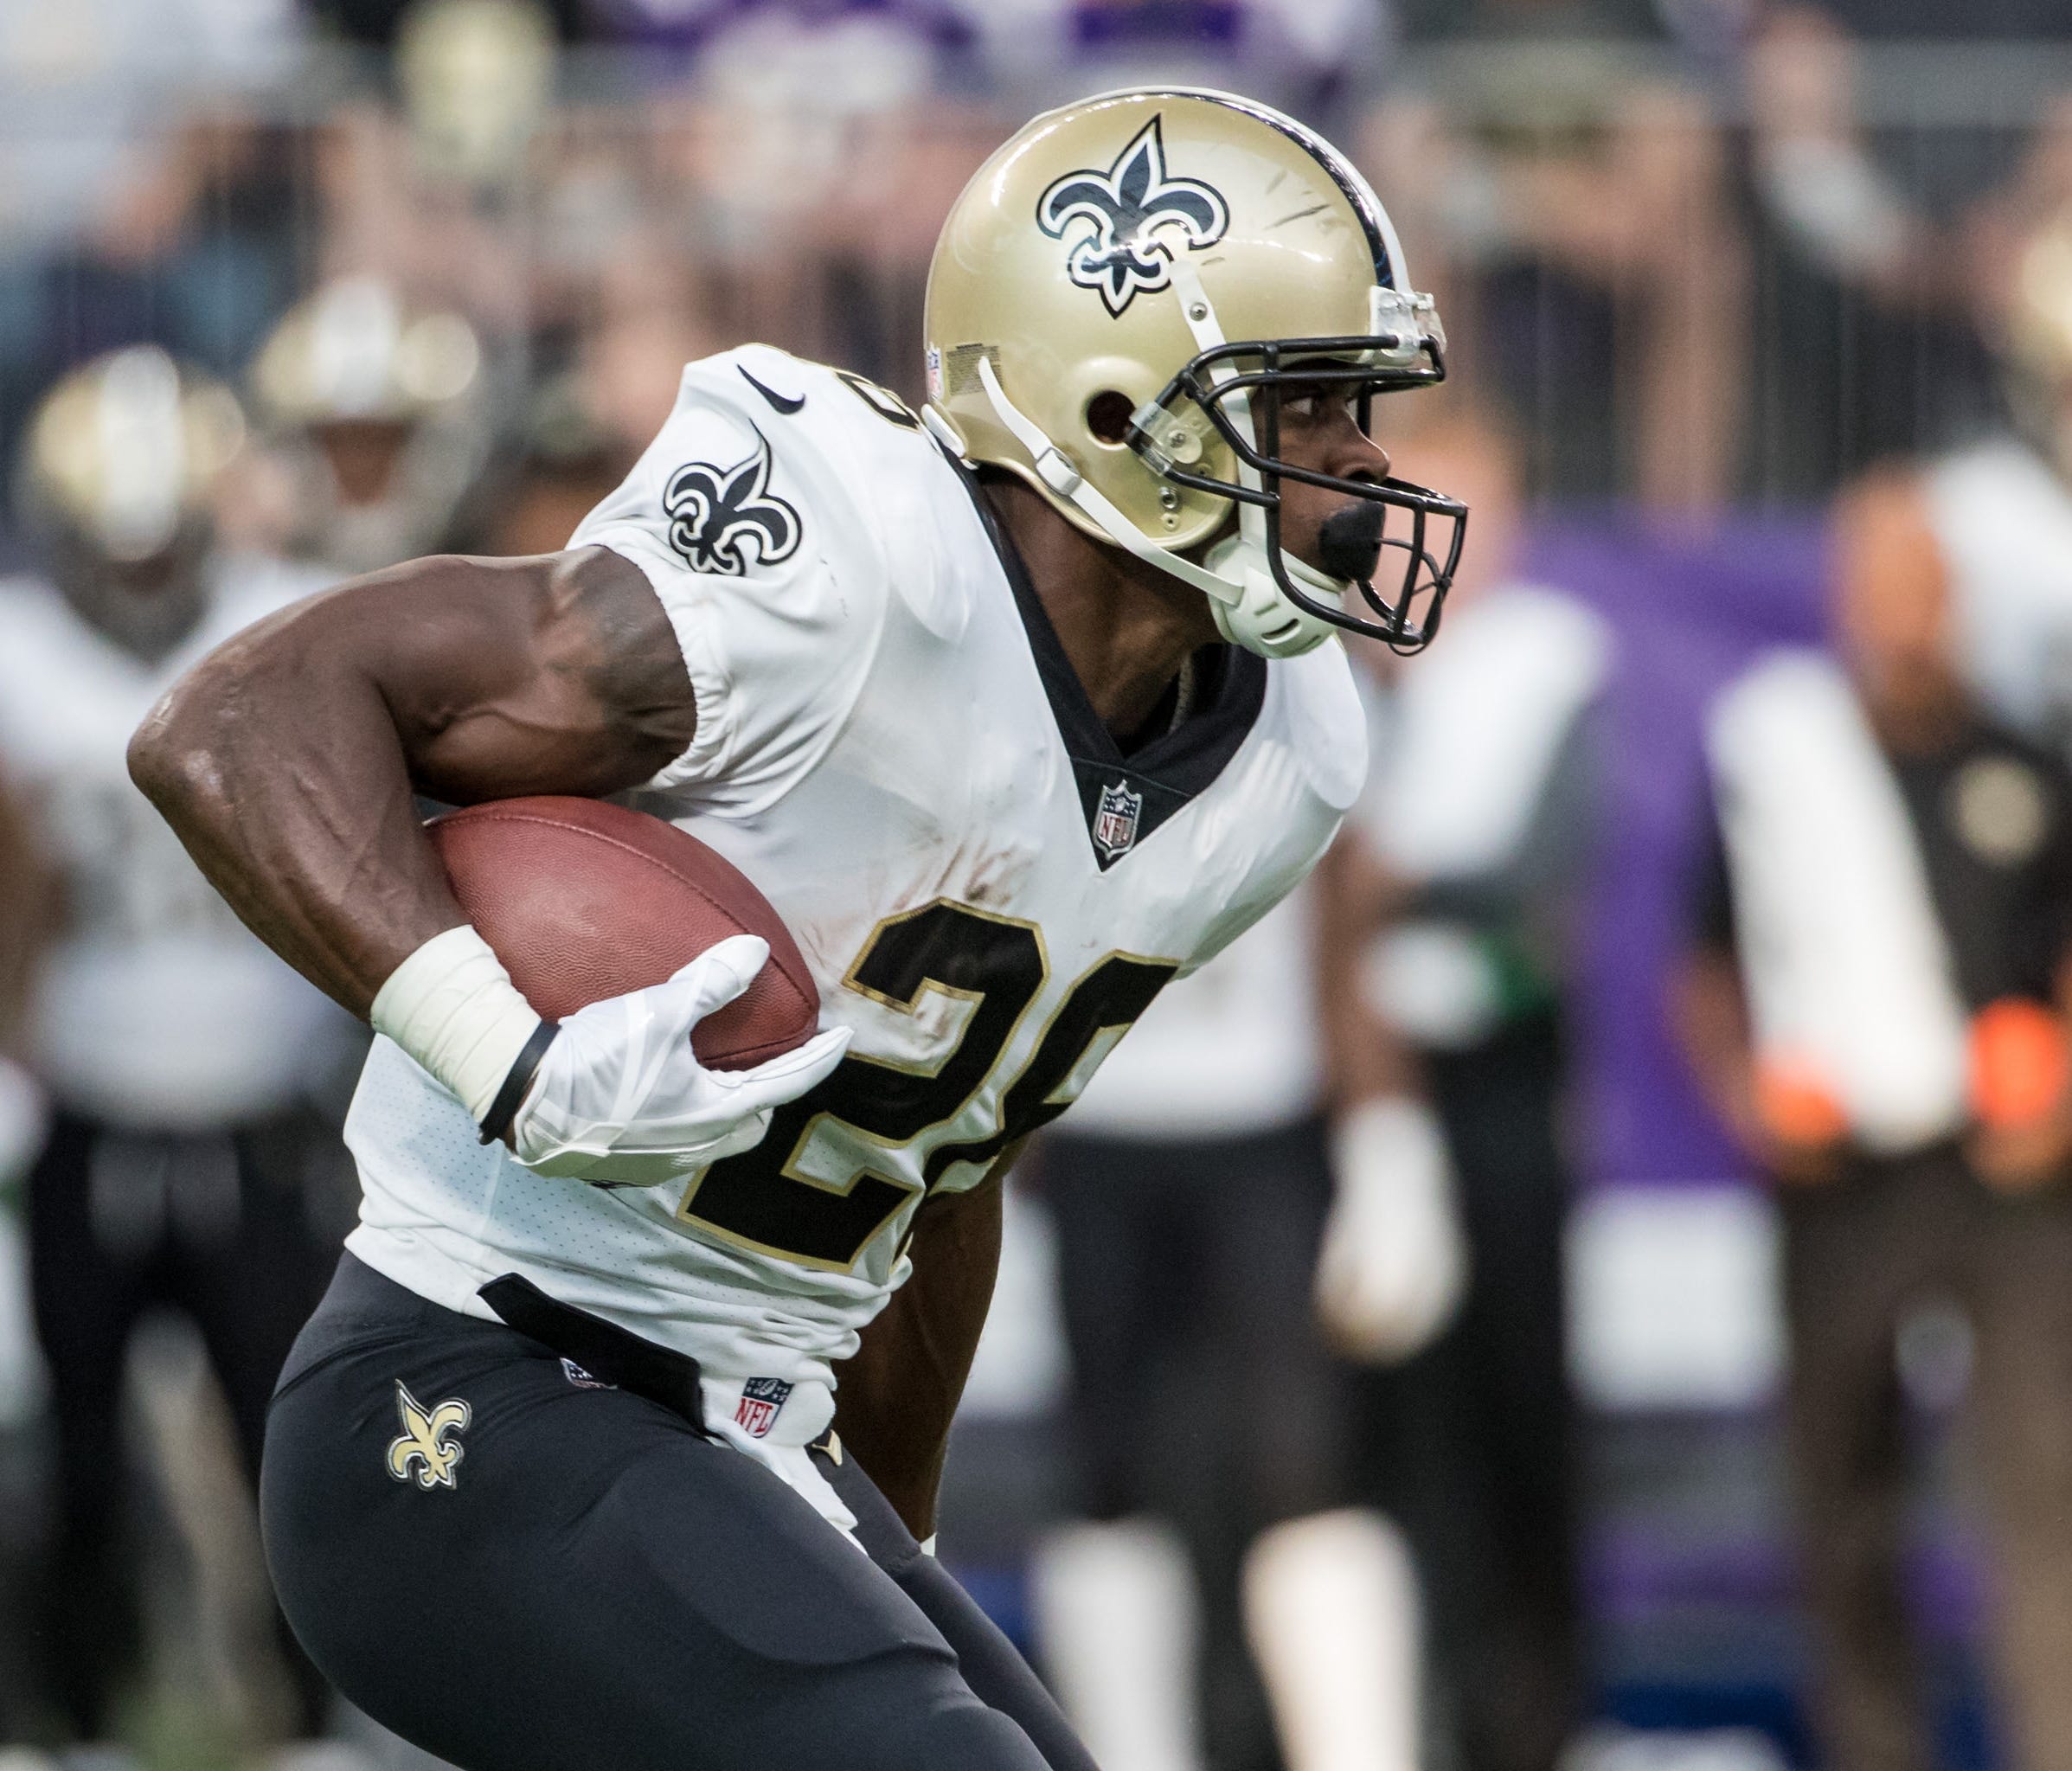 Adrian Peterson's debut with the New Orleans Saints was less than stellar. He carried the ball six times for 18 yards.